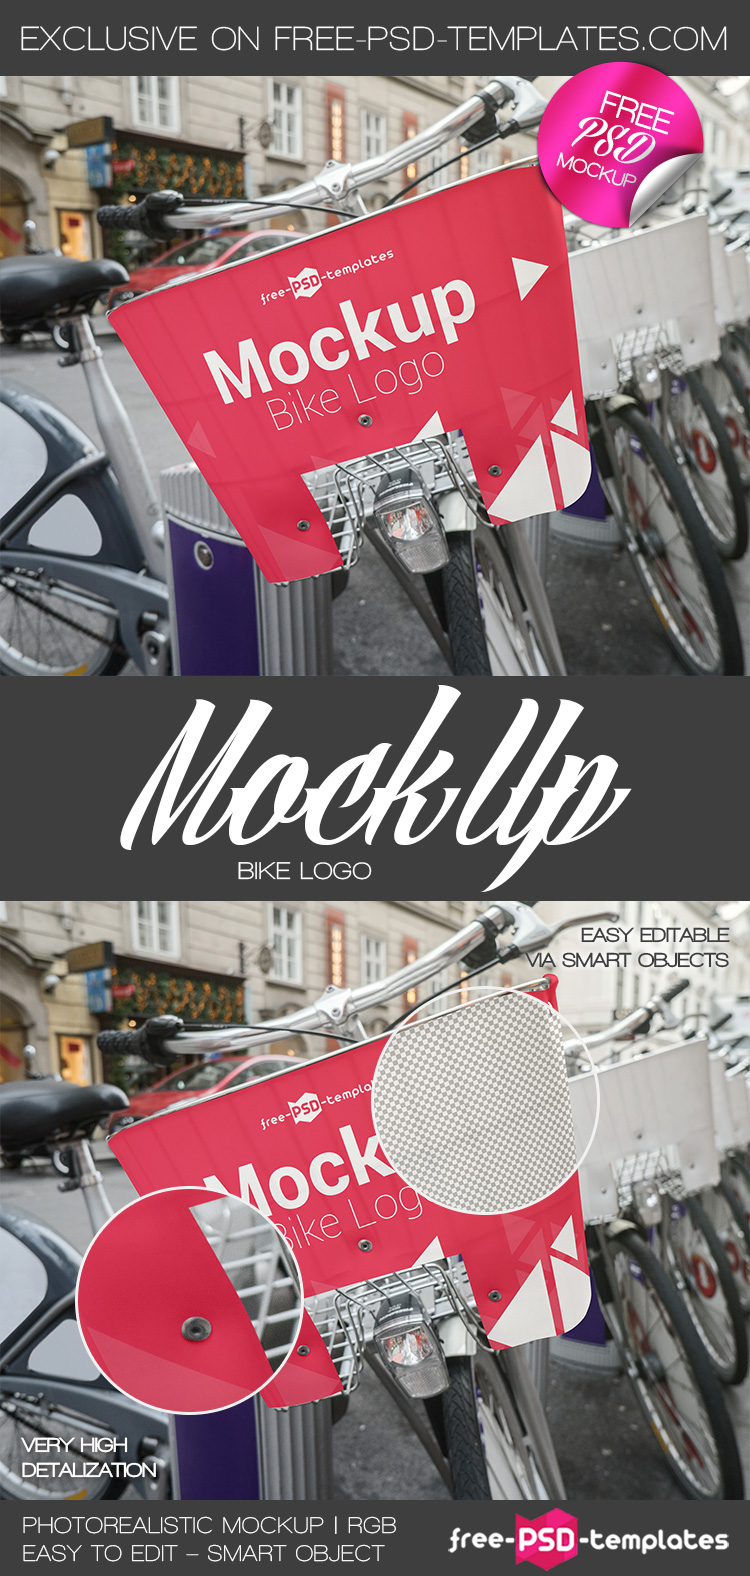 Download Free Bike Logo Mock-up in PSD | Free PSD Templates